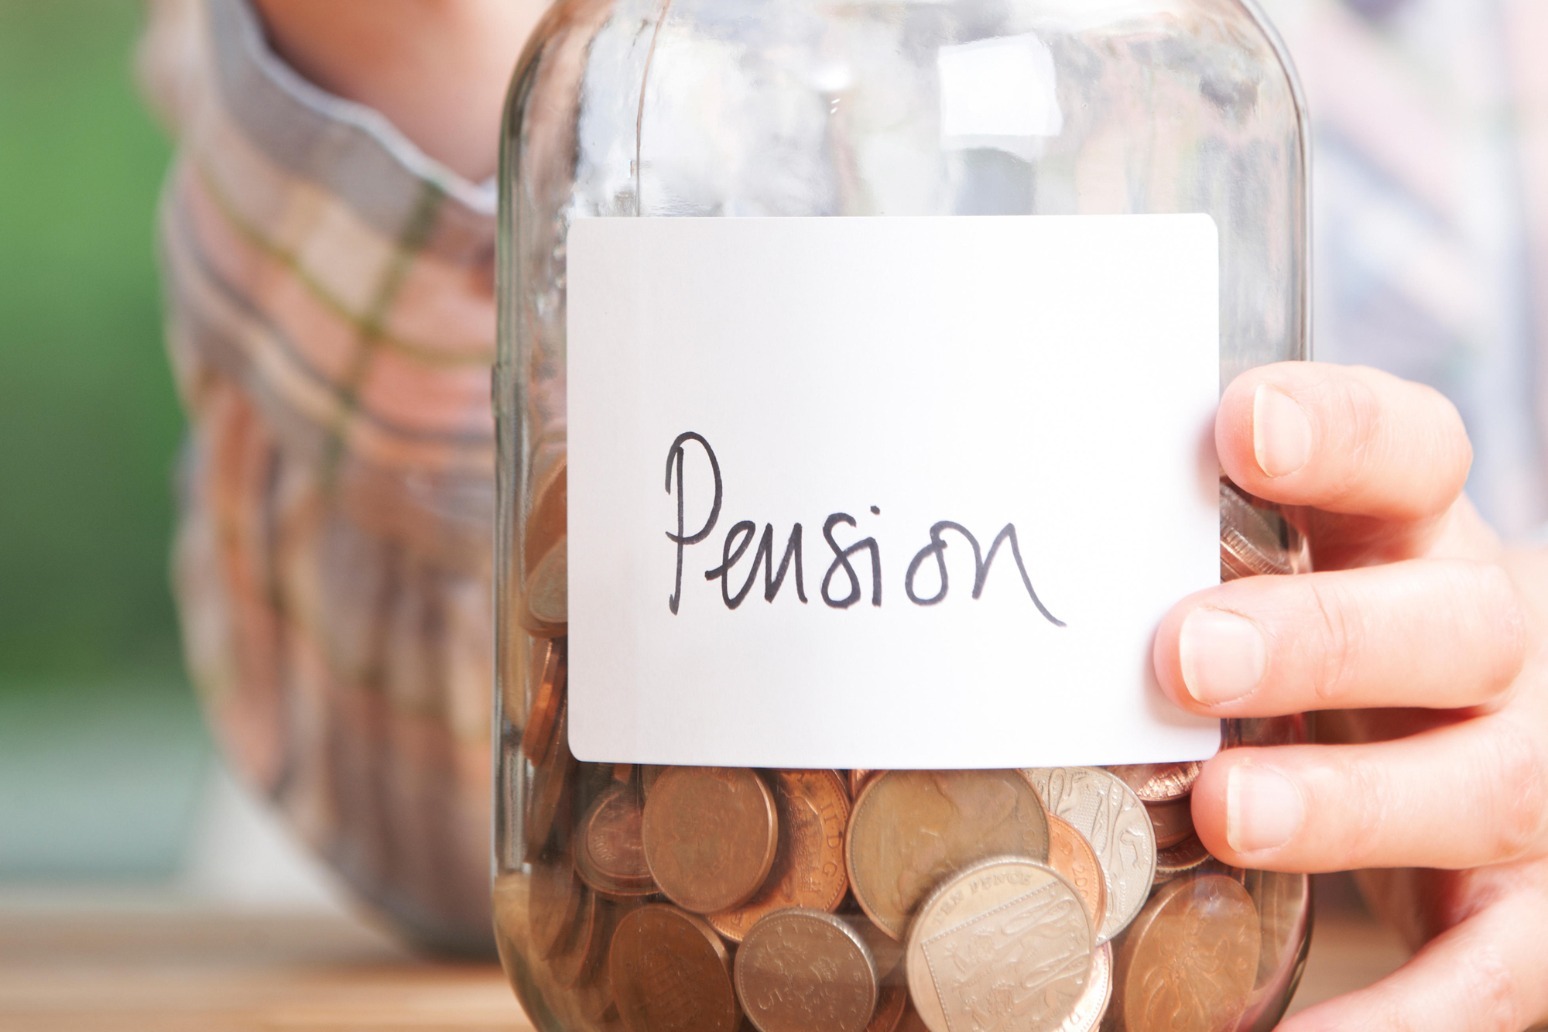 Annual cost of moderate retirement up £8,000 